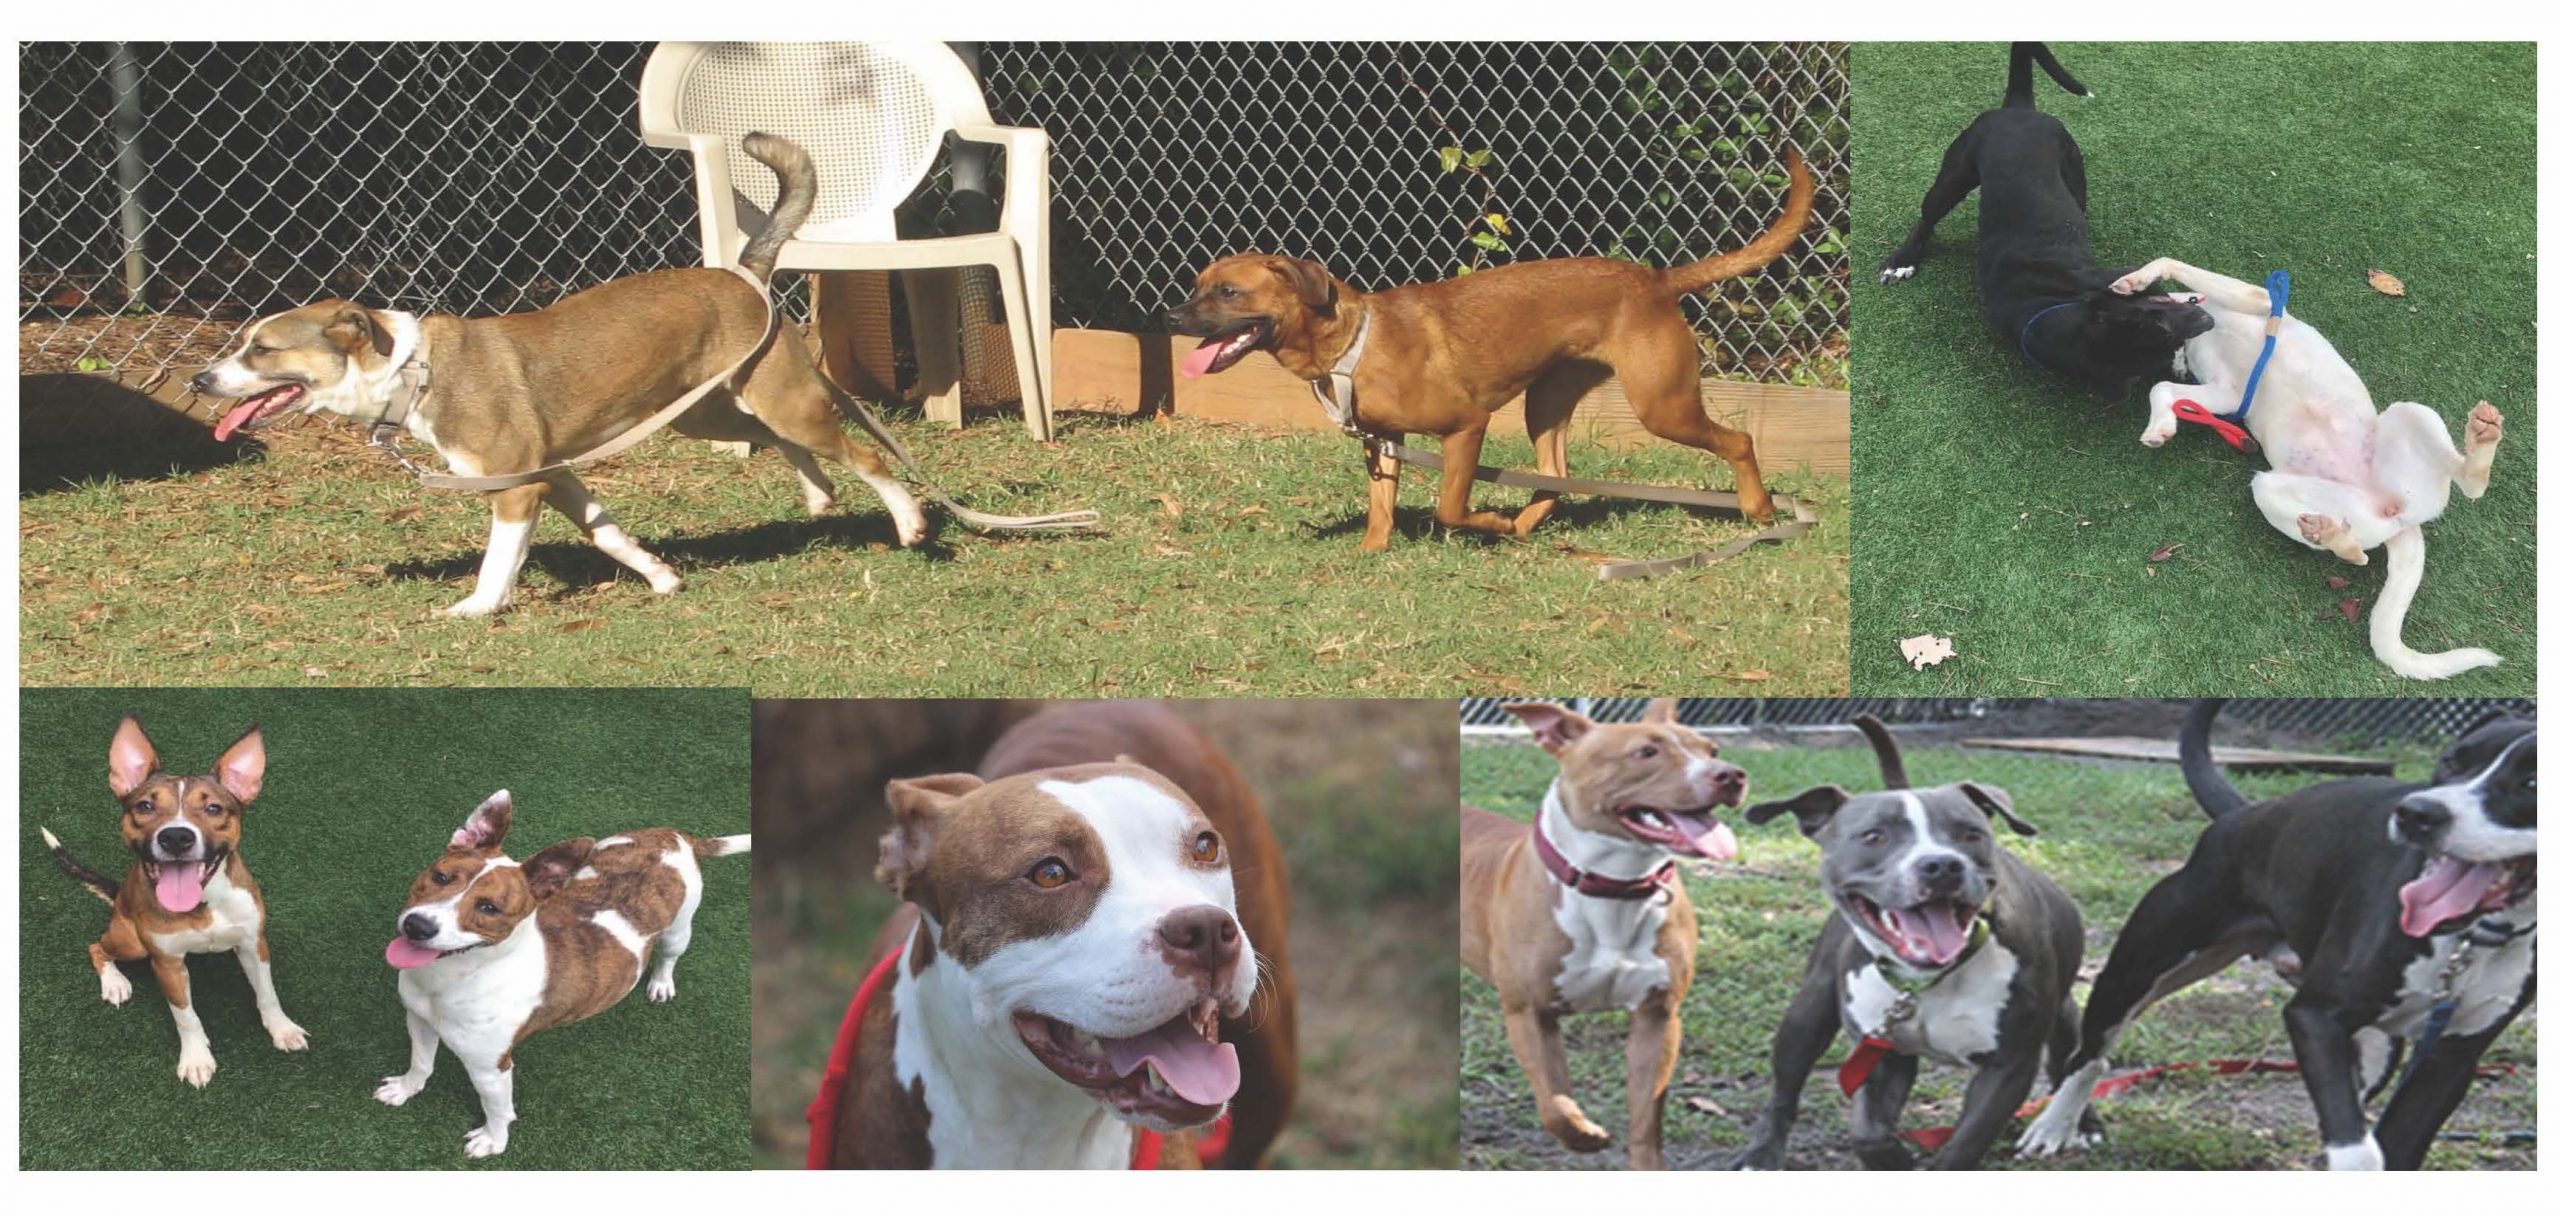 collage of photos of various shelter dogs enjoy playing chase, wrestling, running, or simply hanging out together in play yards.